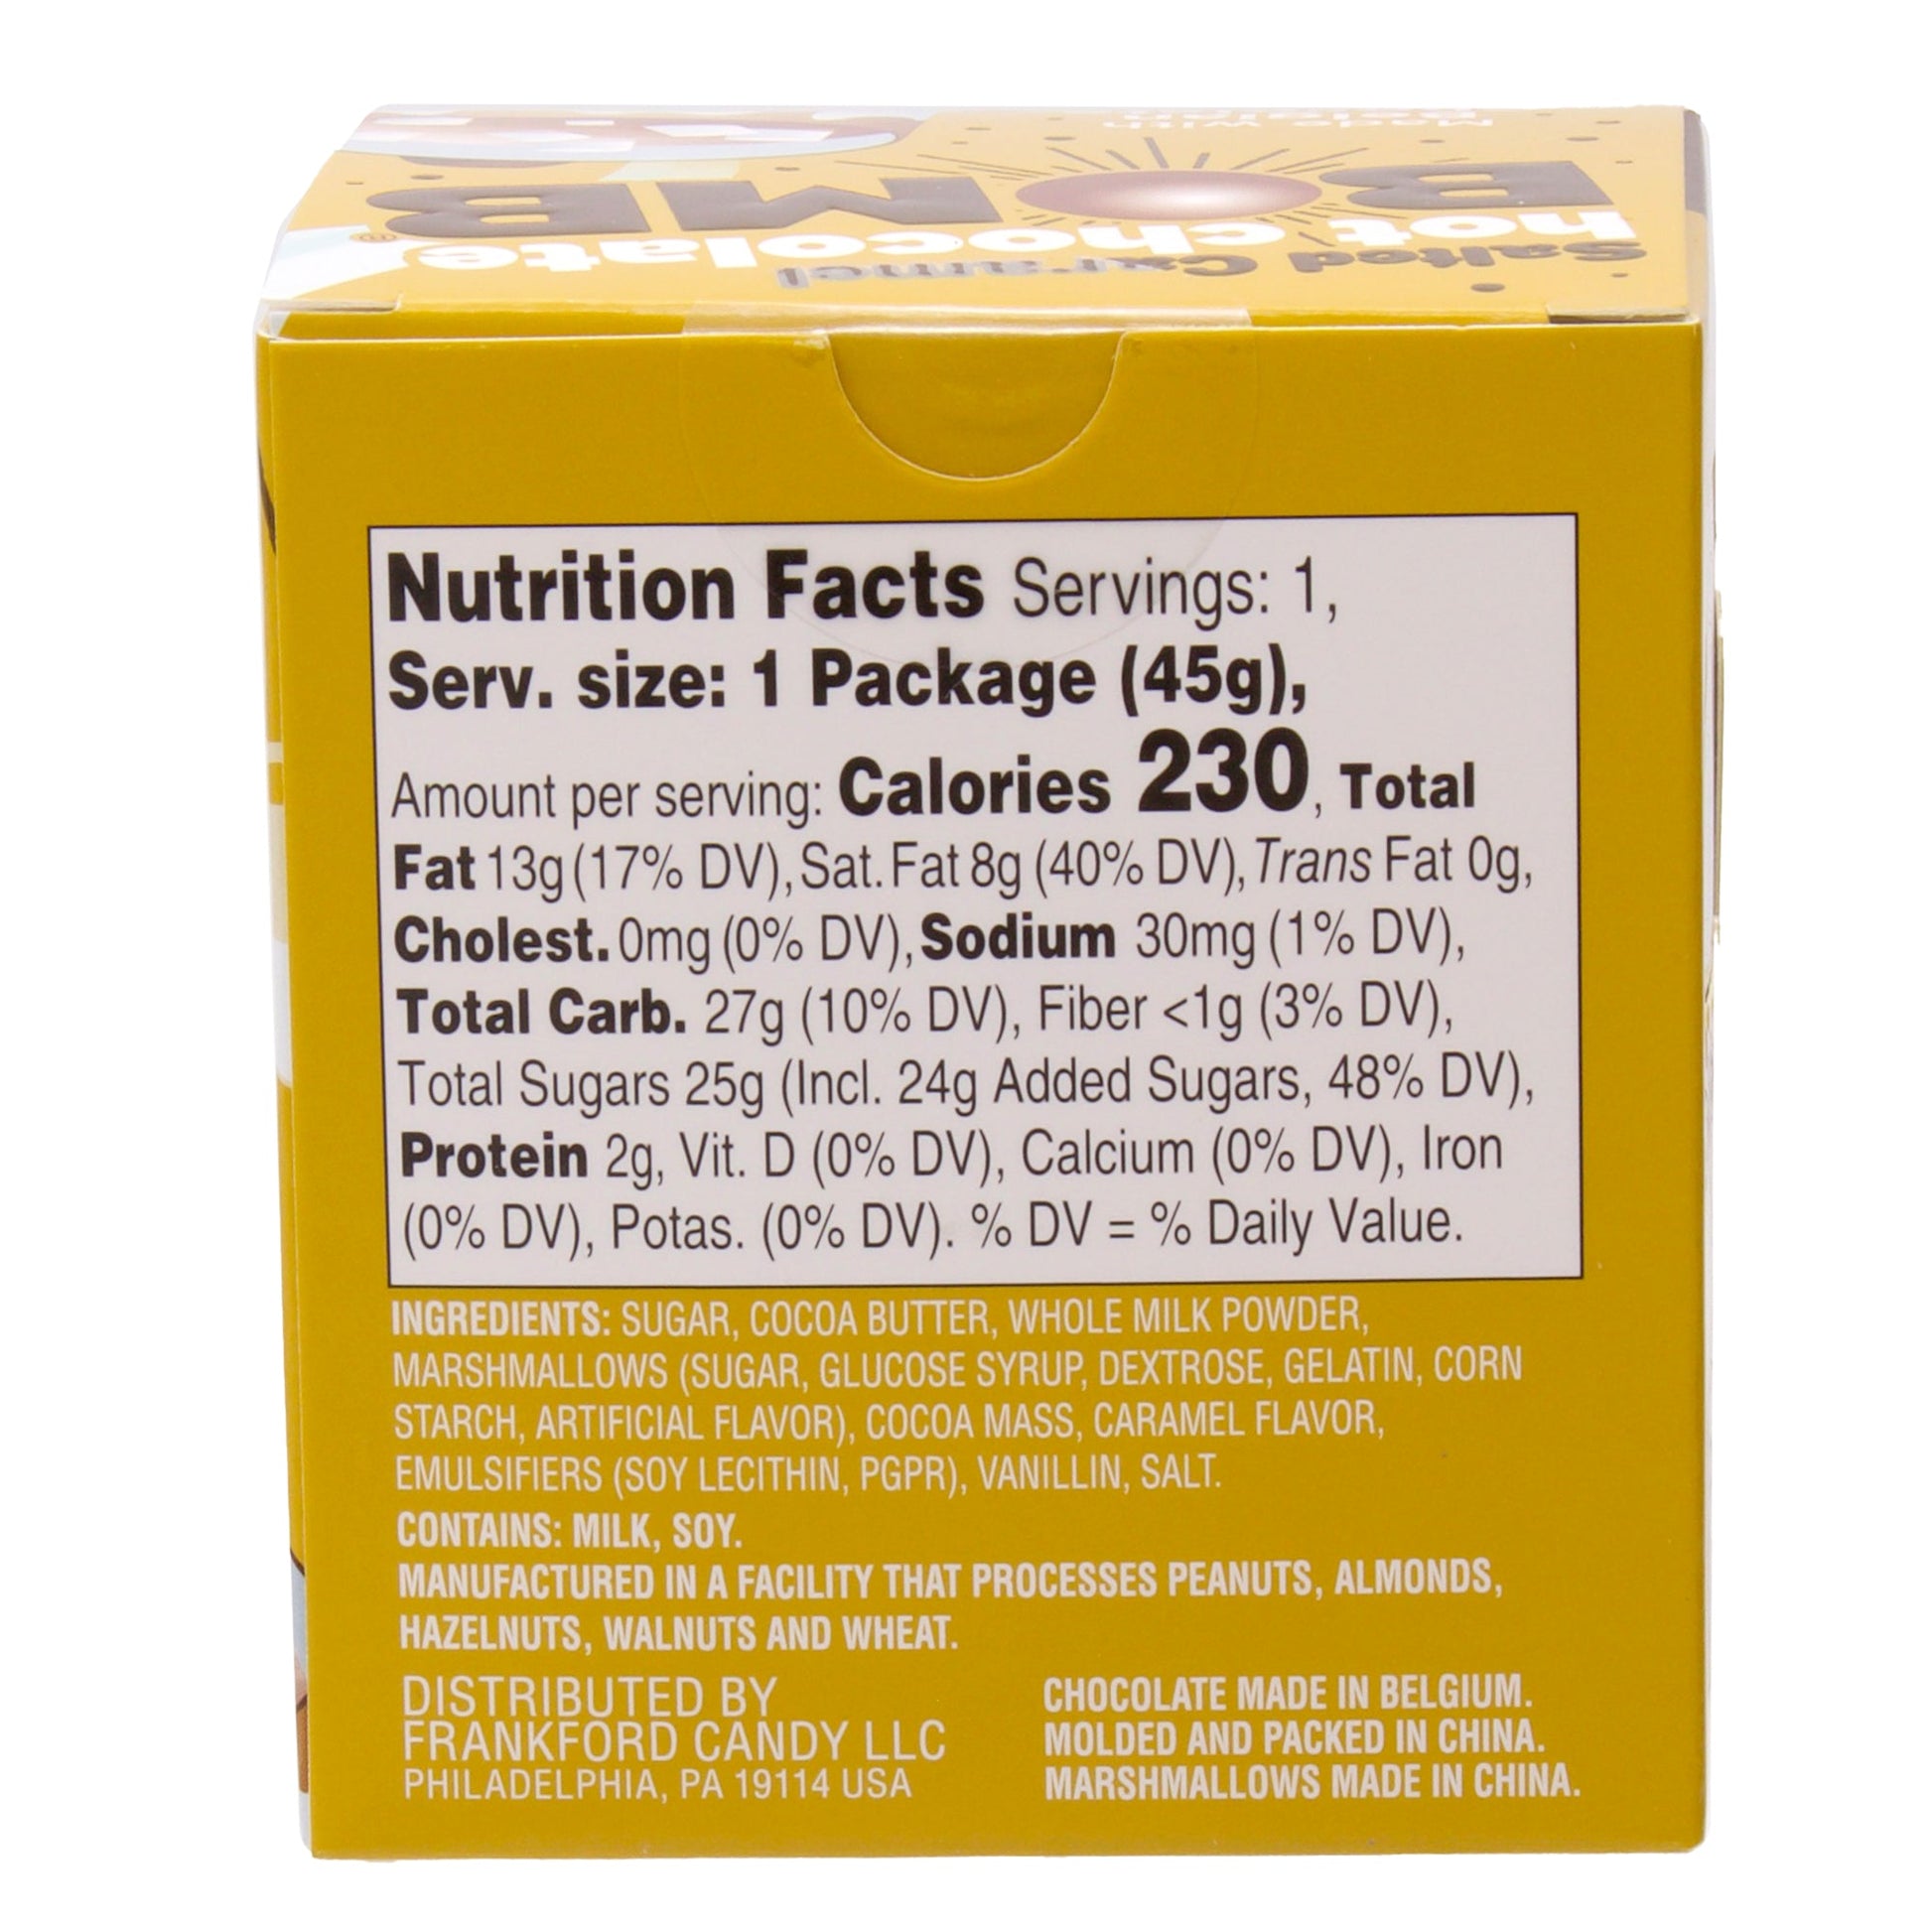 back of yellow box with nutrition facts and ingredients